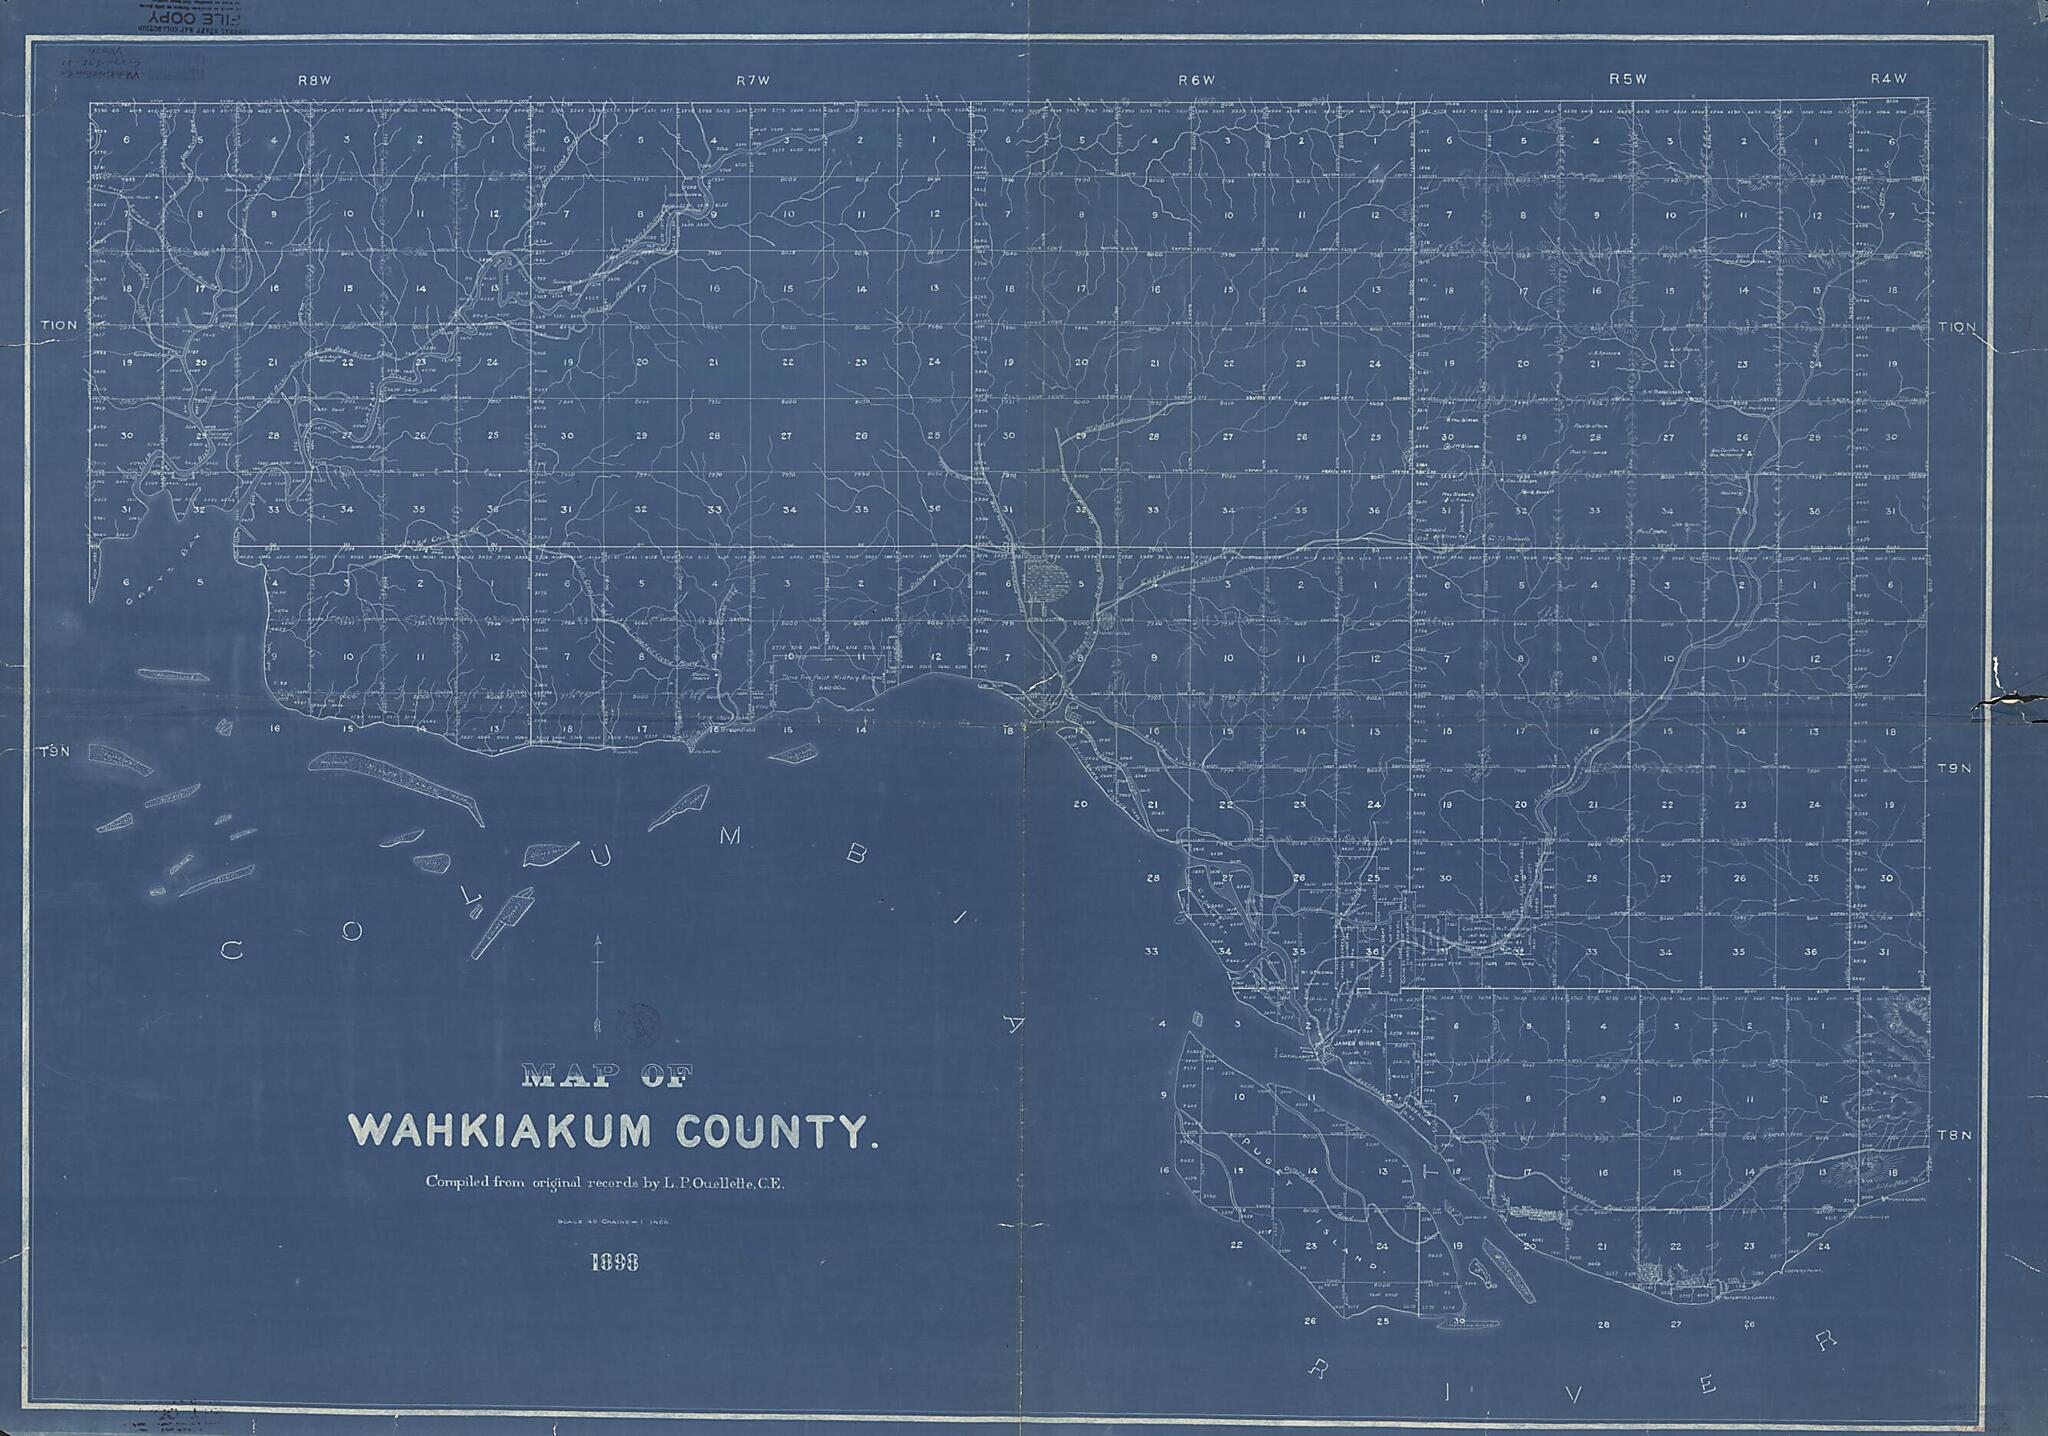 This old map of Map of Wahkiakum County from 1898 was created by L. P. Ouellette in 1898